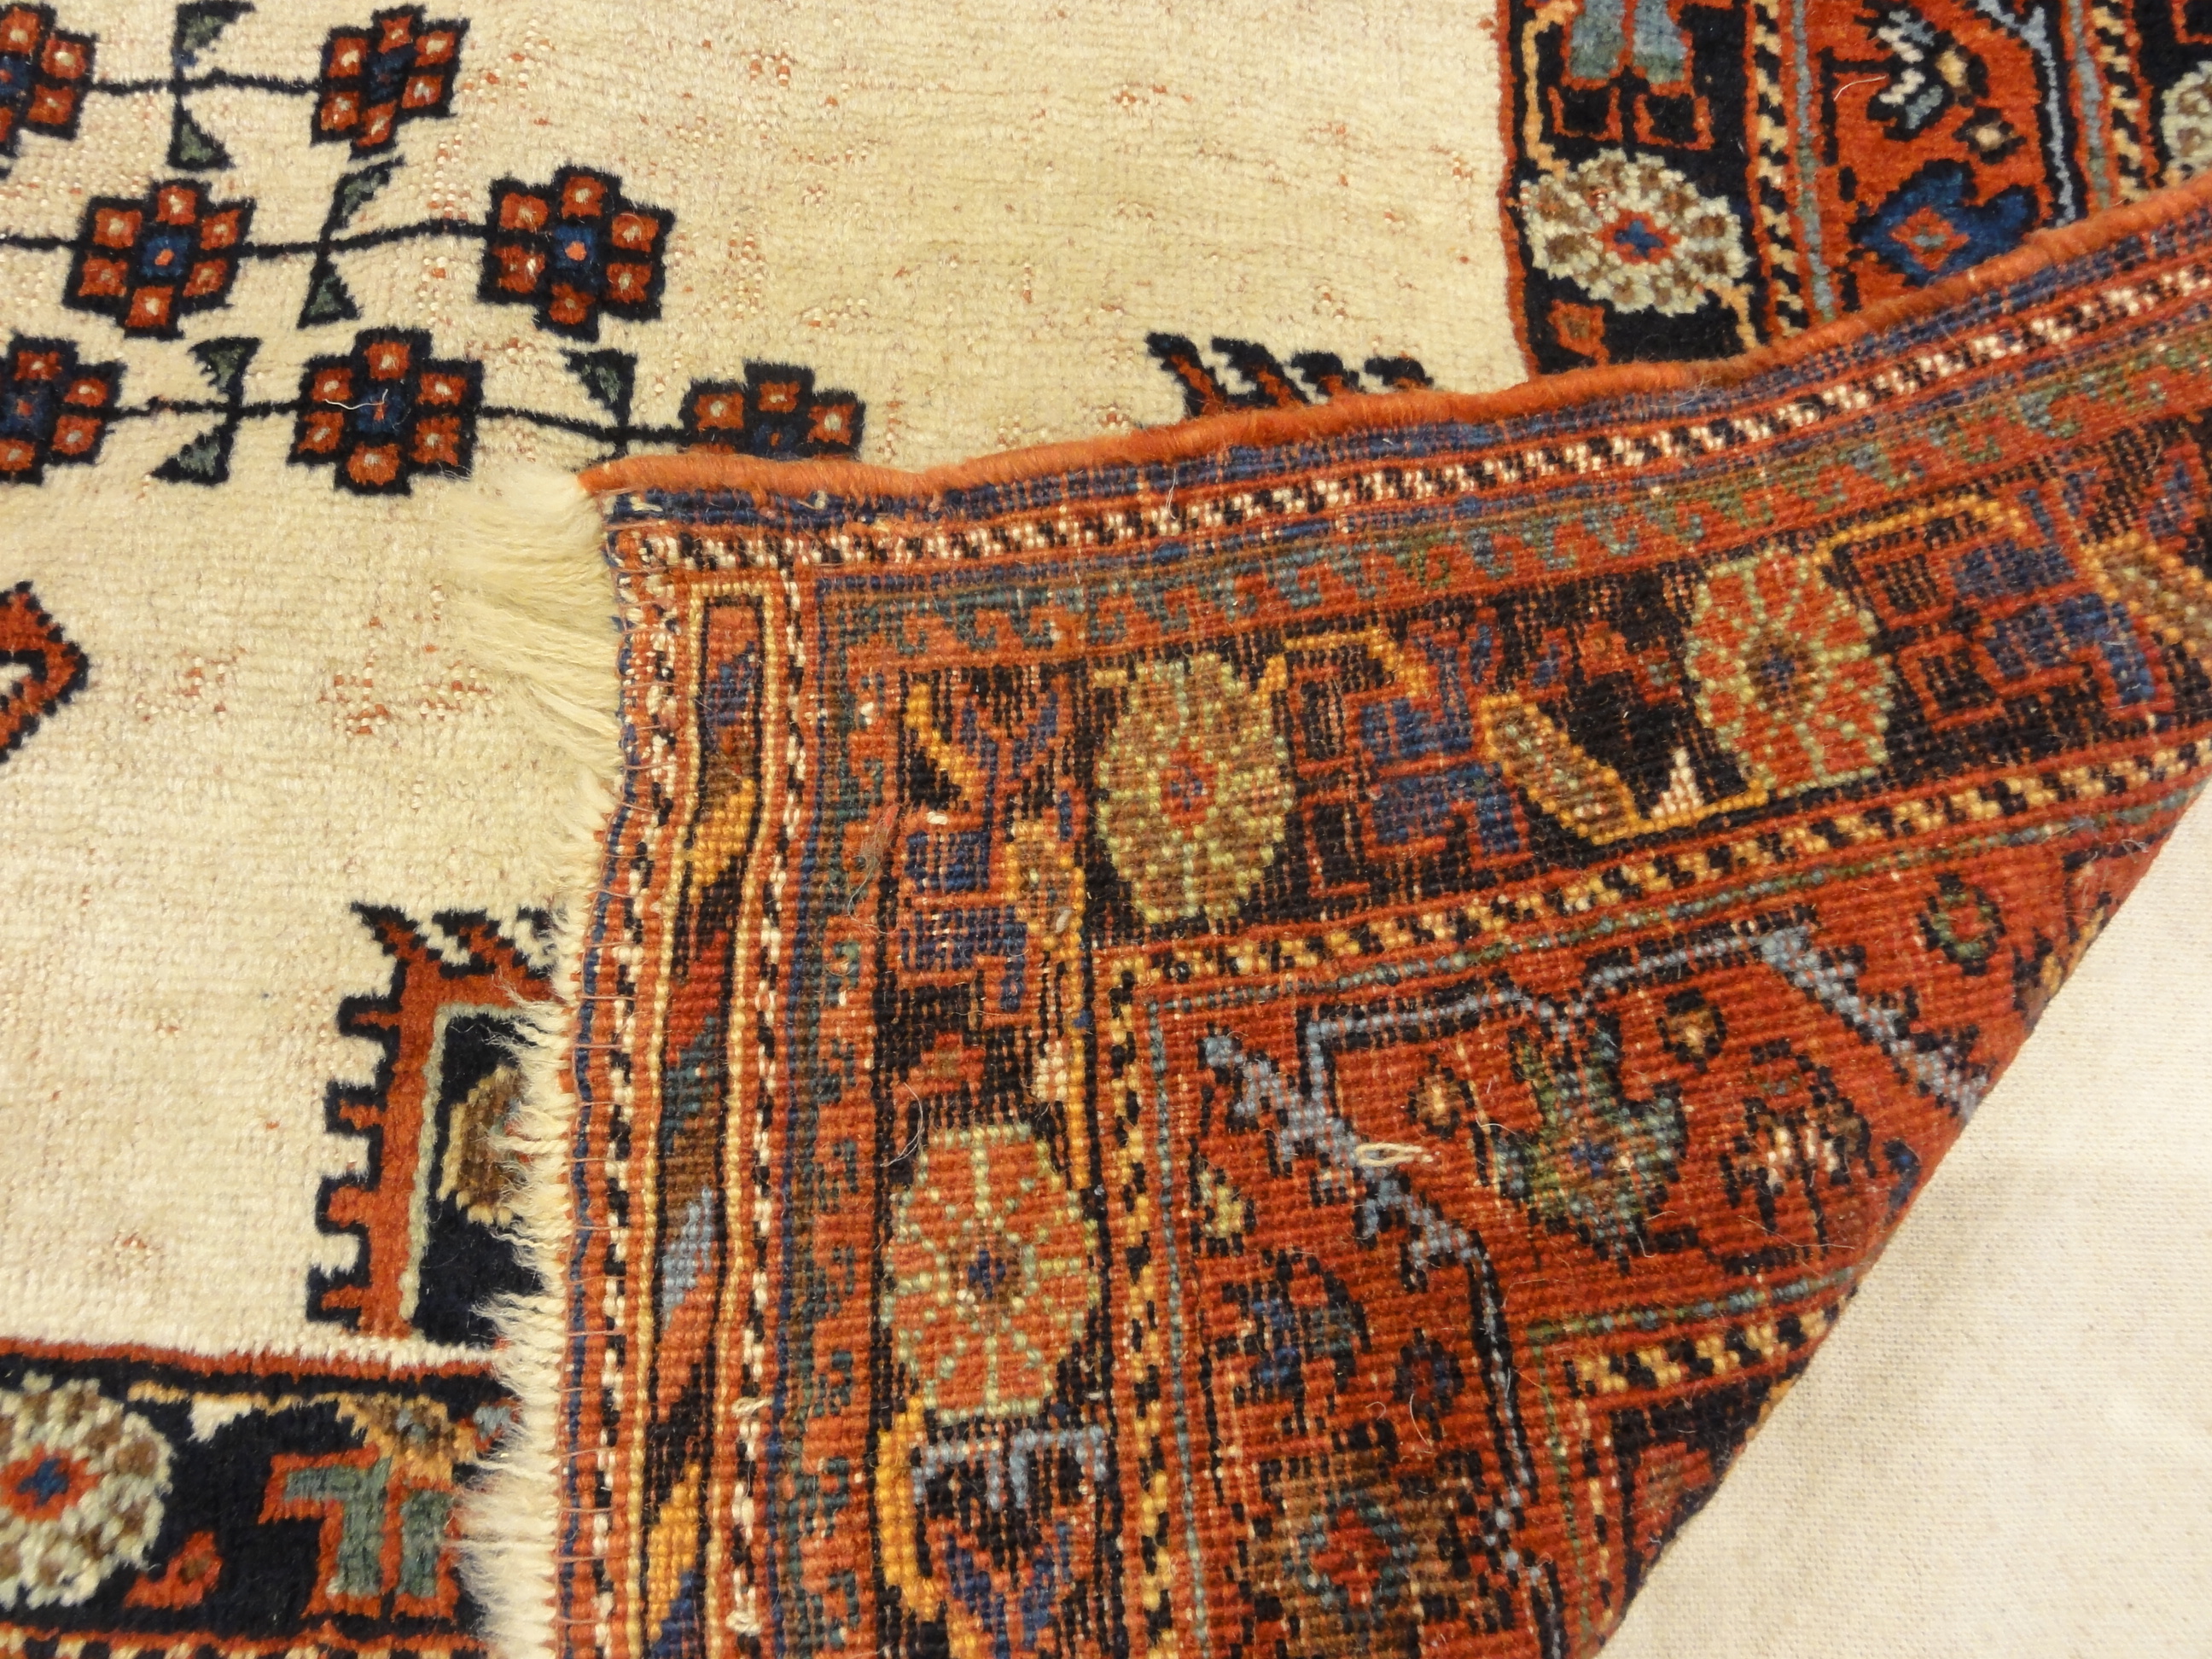 A Rare Antique Persian Afshar Rug. A piece of genuine handwoven carpet art. Sold by Santa Barbara Design Center, Rugs and More.